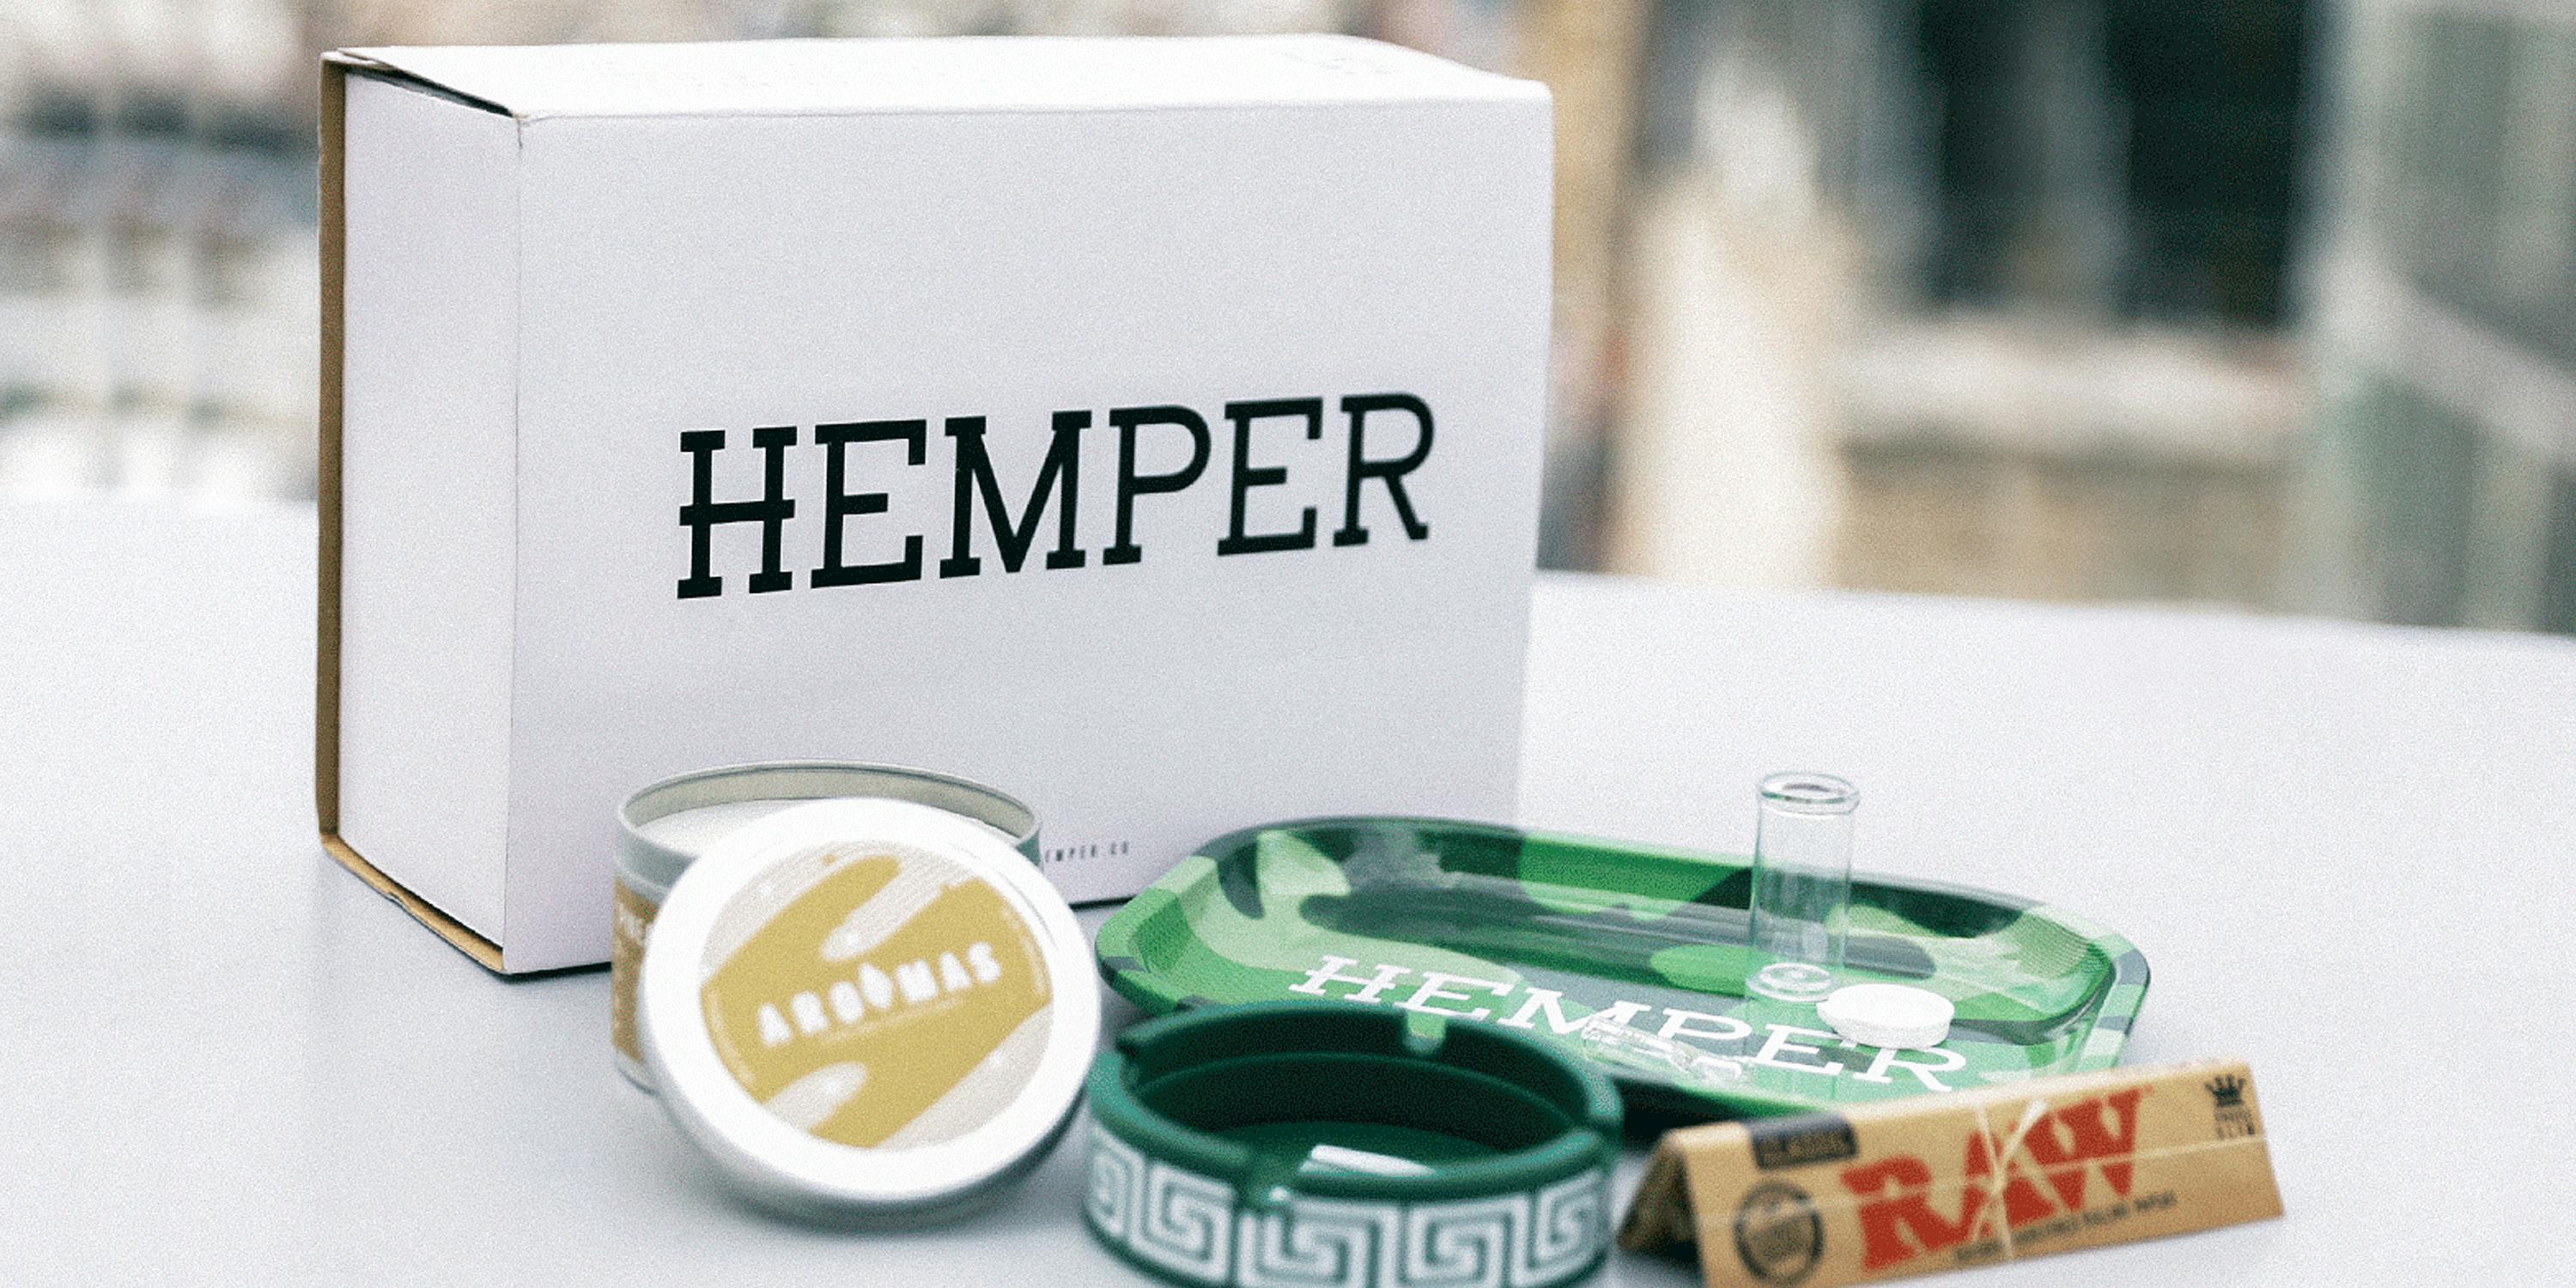 A photo of the contents of Hemper, a subscription box for weed products